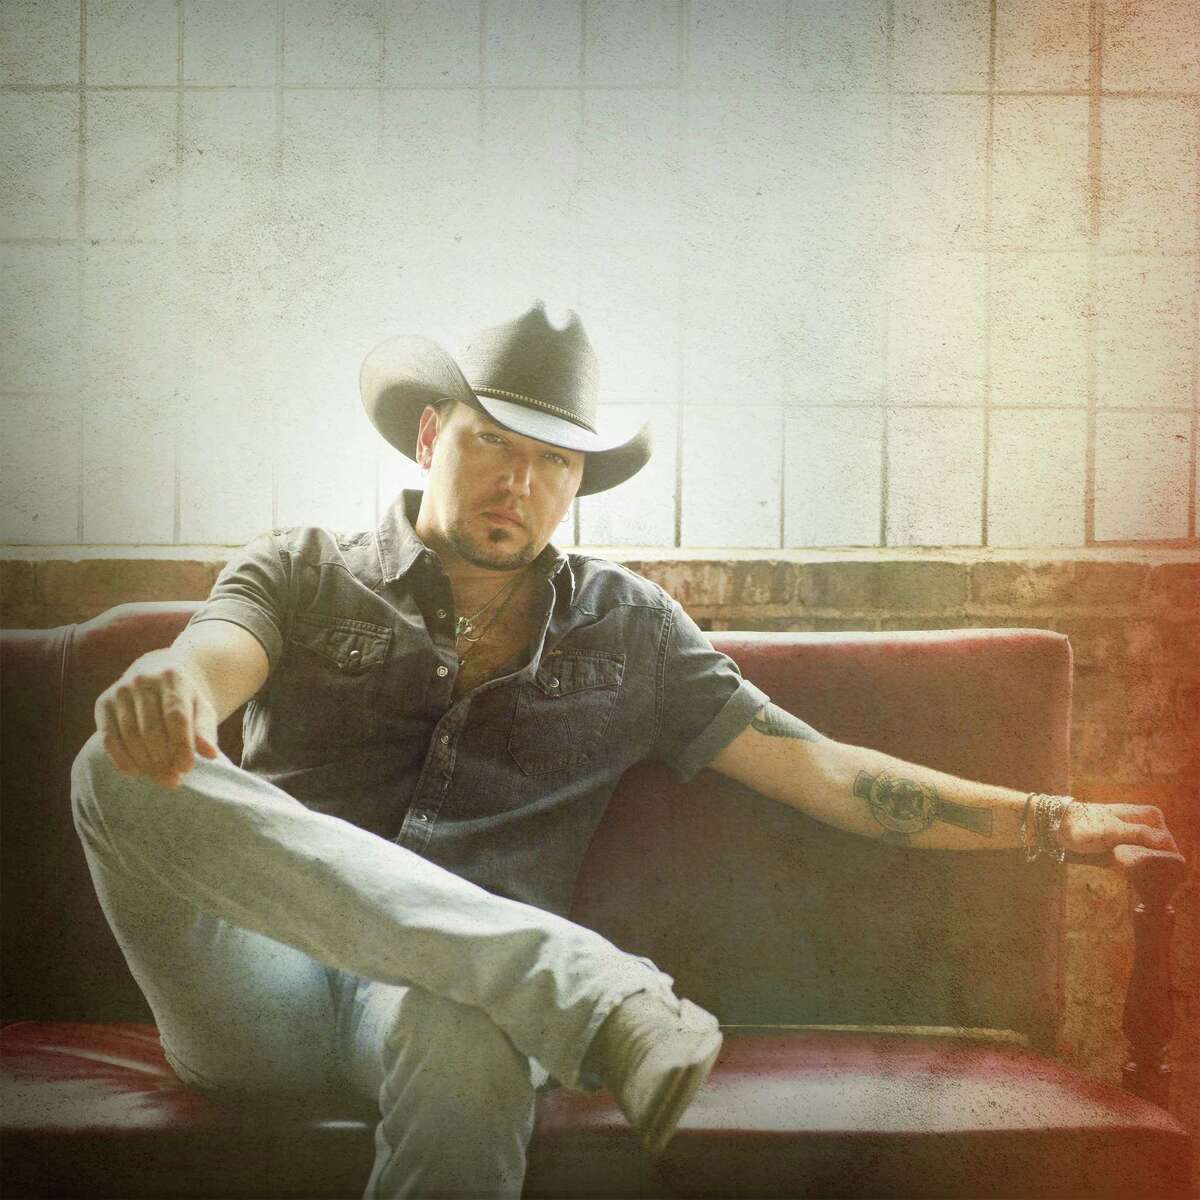 Jason Aldean will perform at Hartford’s Xfinity Theatre on Friday. Find out more.